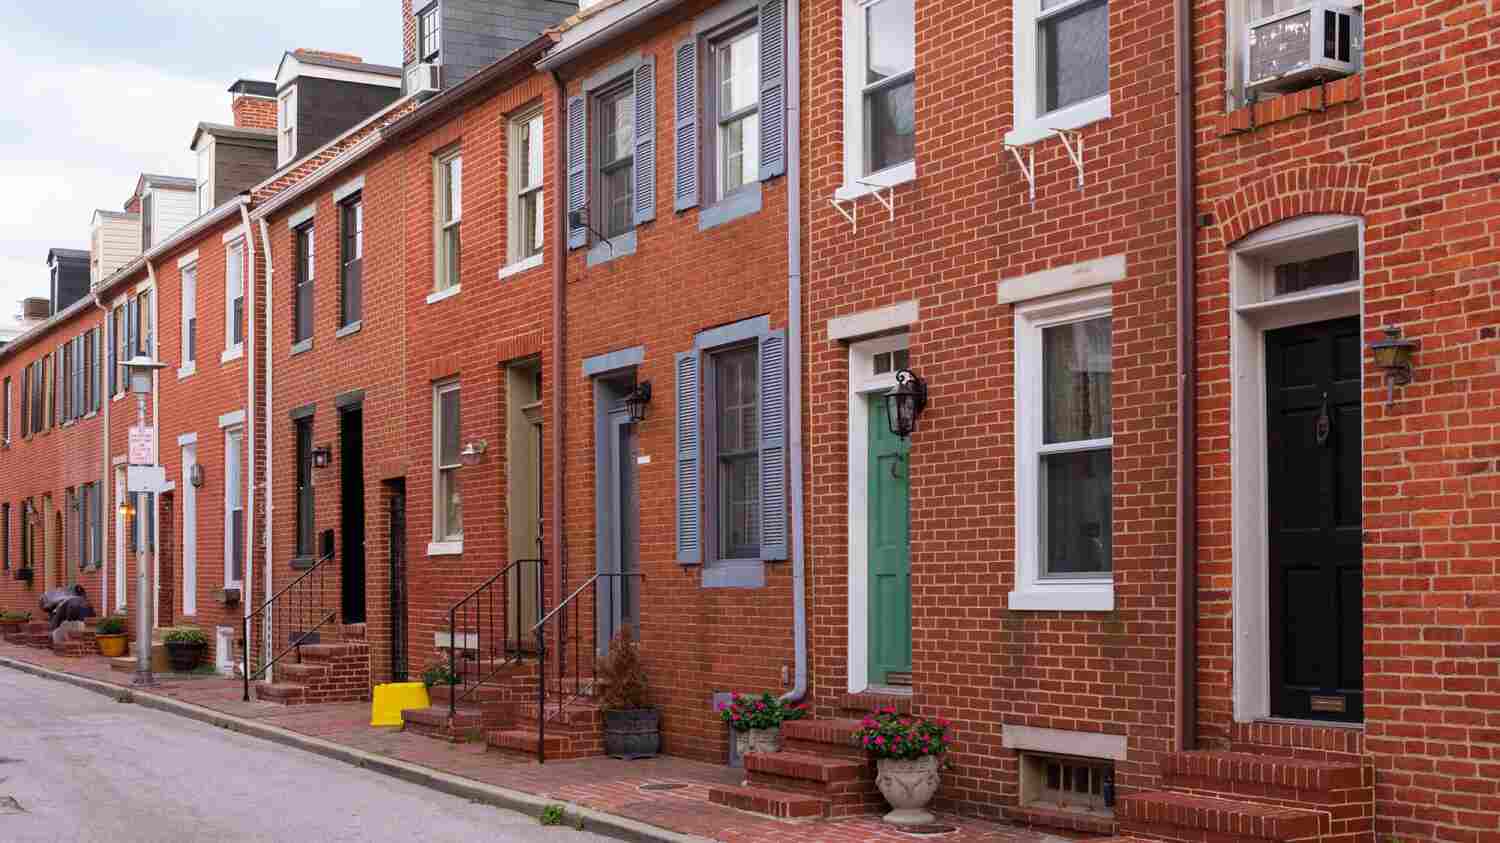 Red brick Baltimore row houses. Baltimore Medical System serves the local community.